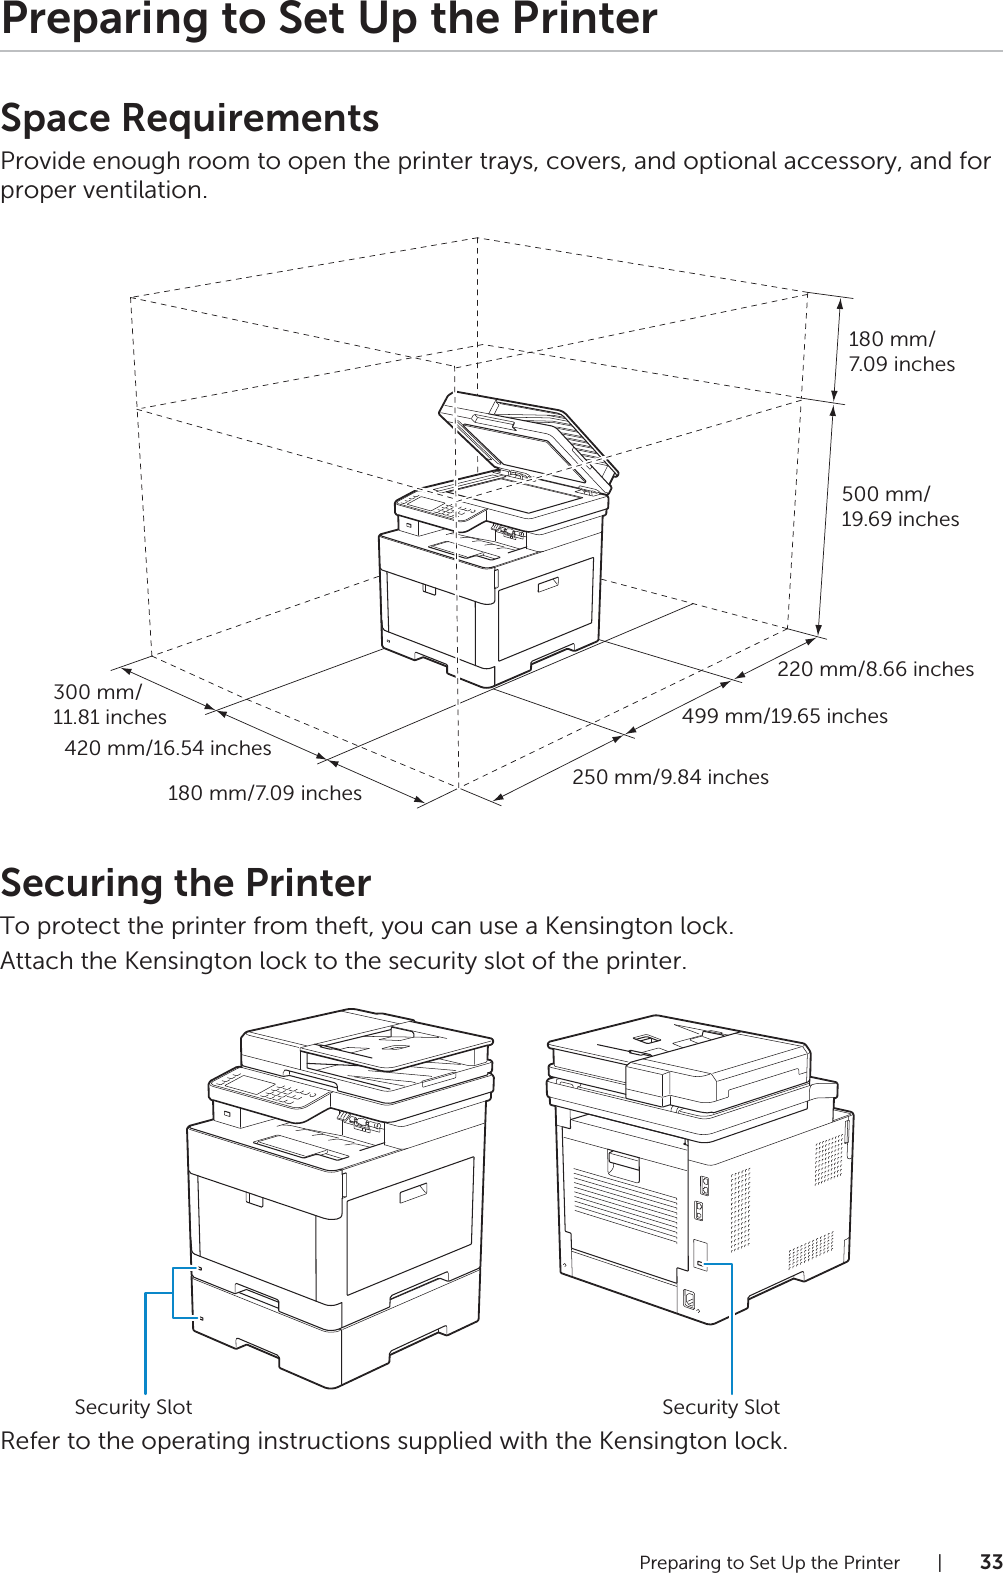 Preparing to Set Up the Printer |33Preparing to Set Up the PrinterSpace RequirementsProvide enough room to open the printer trays, covers, and optional accessory, and for proper ventilation.Securing the PrinterTo protect the printer from theft, you can use a Kensington lock.Attach the Kensington lock to the security slot of the printer.Refer to the operating instructions supplied with the Kensington lock.220 mm/8.66 inches499 mm/19.65 inches250 mm/9.84 inches300 mm/11.81 inches420 mm/16.54 inches180 mm/7.09 inches180 mm/7.09 inches500 mm/19.69 inchesSecurity Slot Security Slot